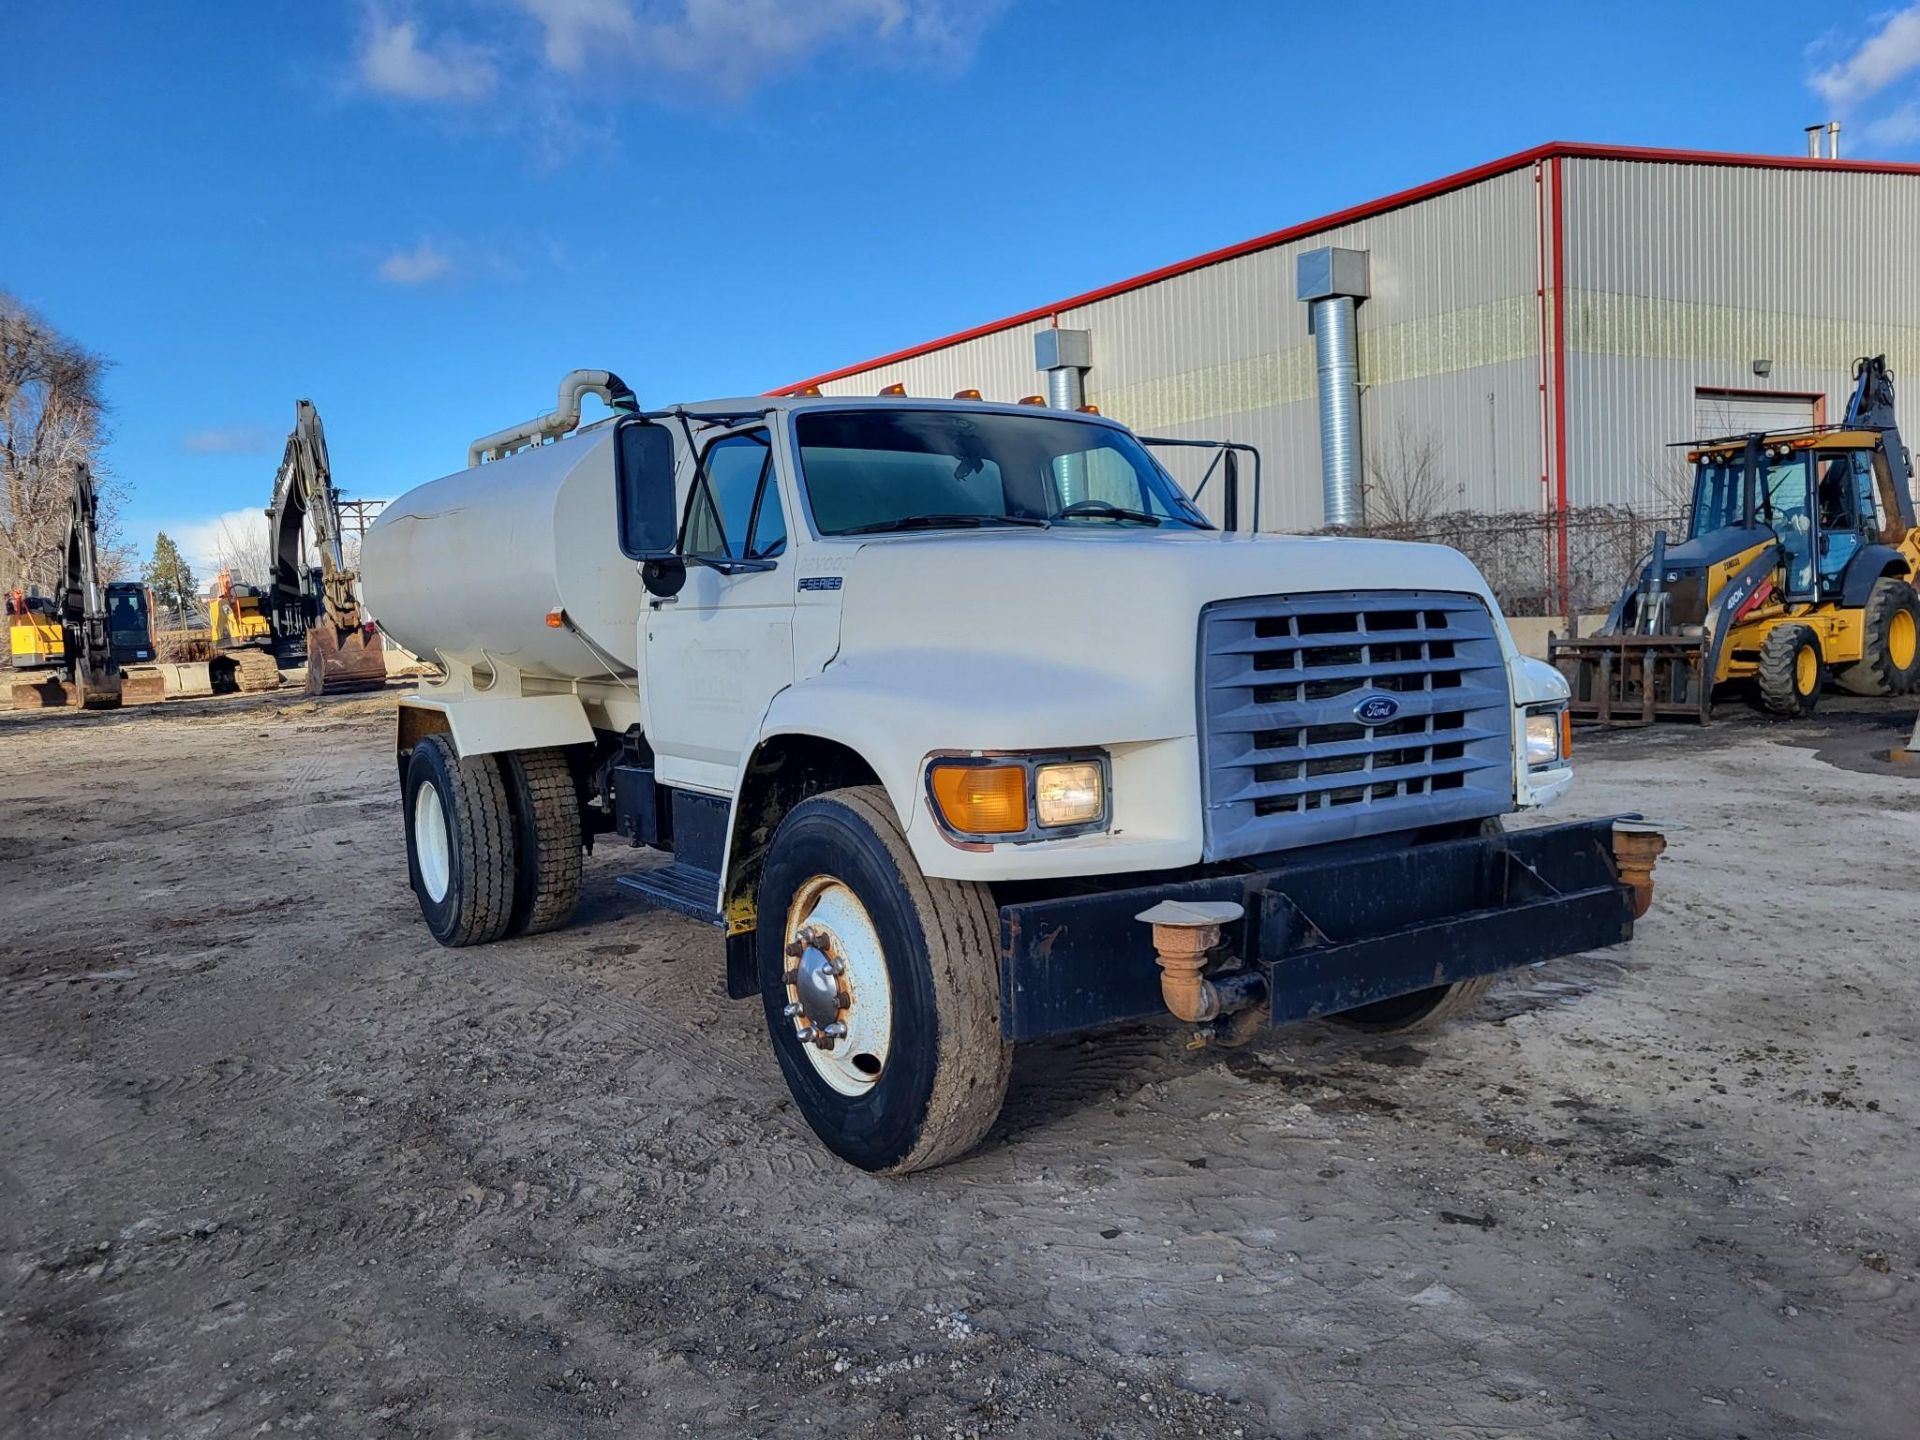 1998 FORD F800 WATER TRUCK, 27,496 MILES - Image 3 of 22